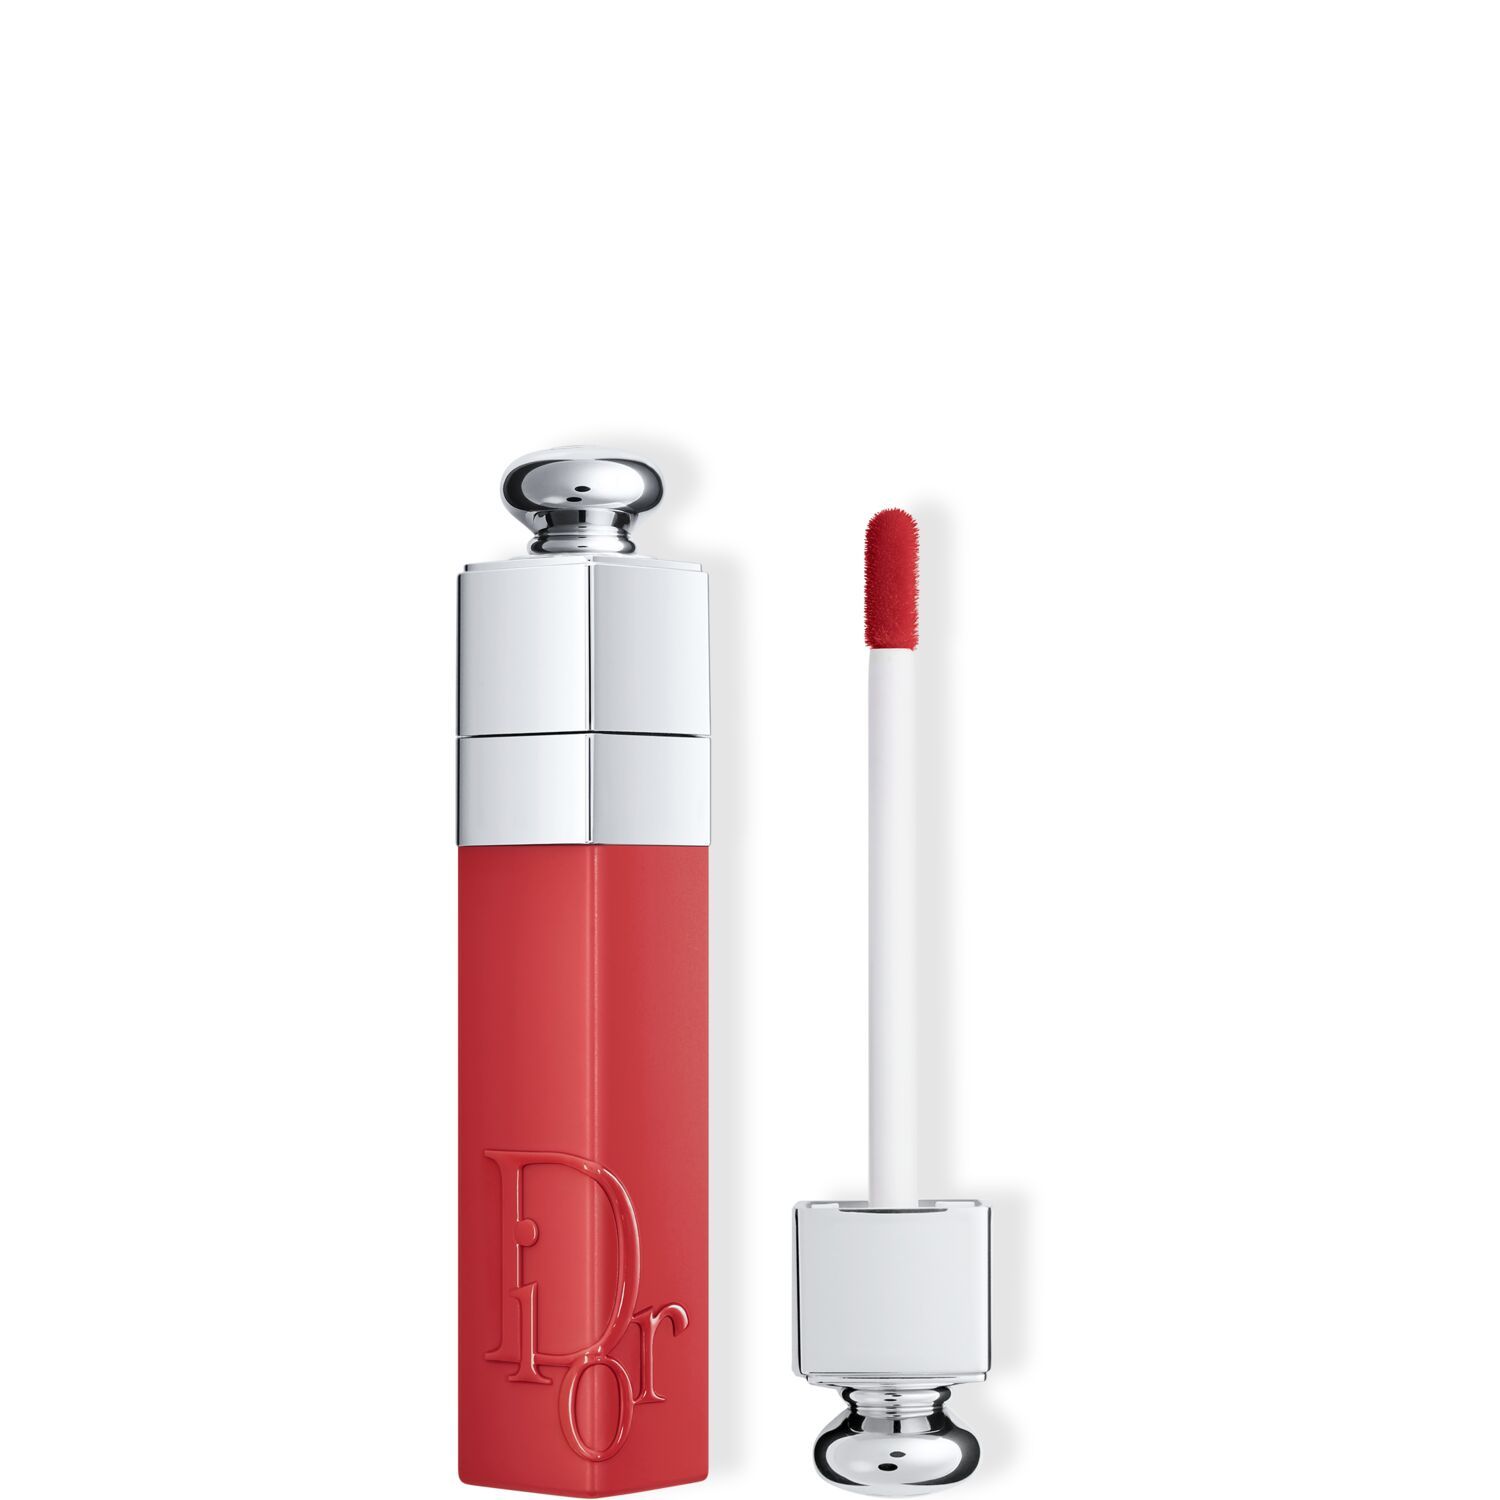 Buy DIOR ADDICT LIP TATTOO  491 NATURAL ROSEWOOD TINT Online at Low Prices  in India  Amazonin